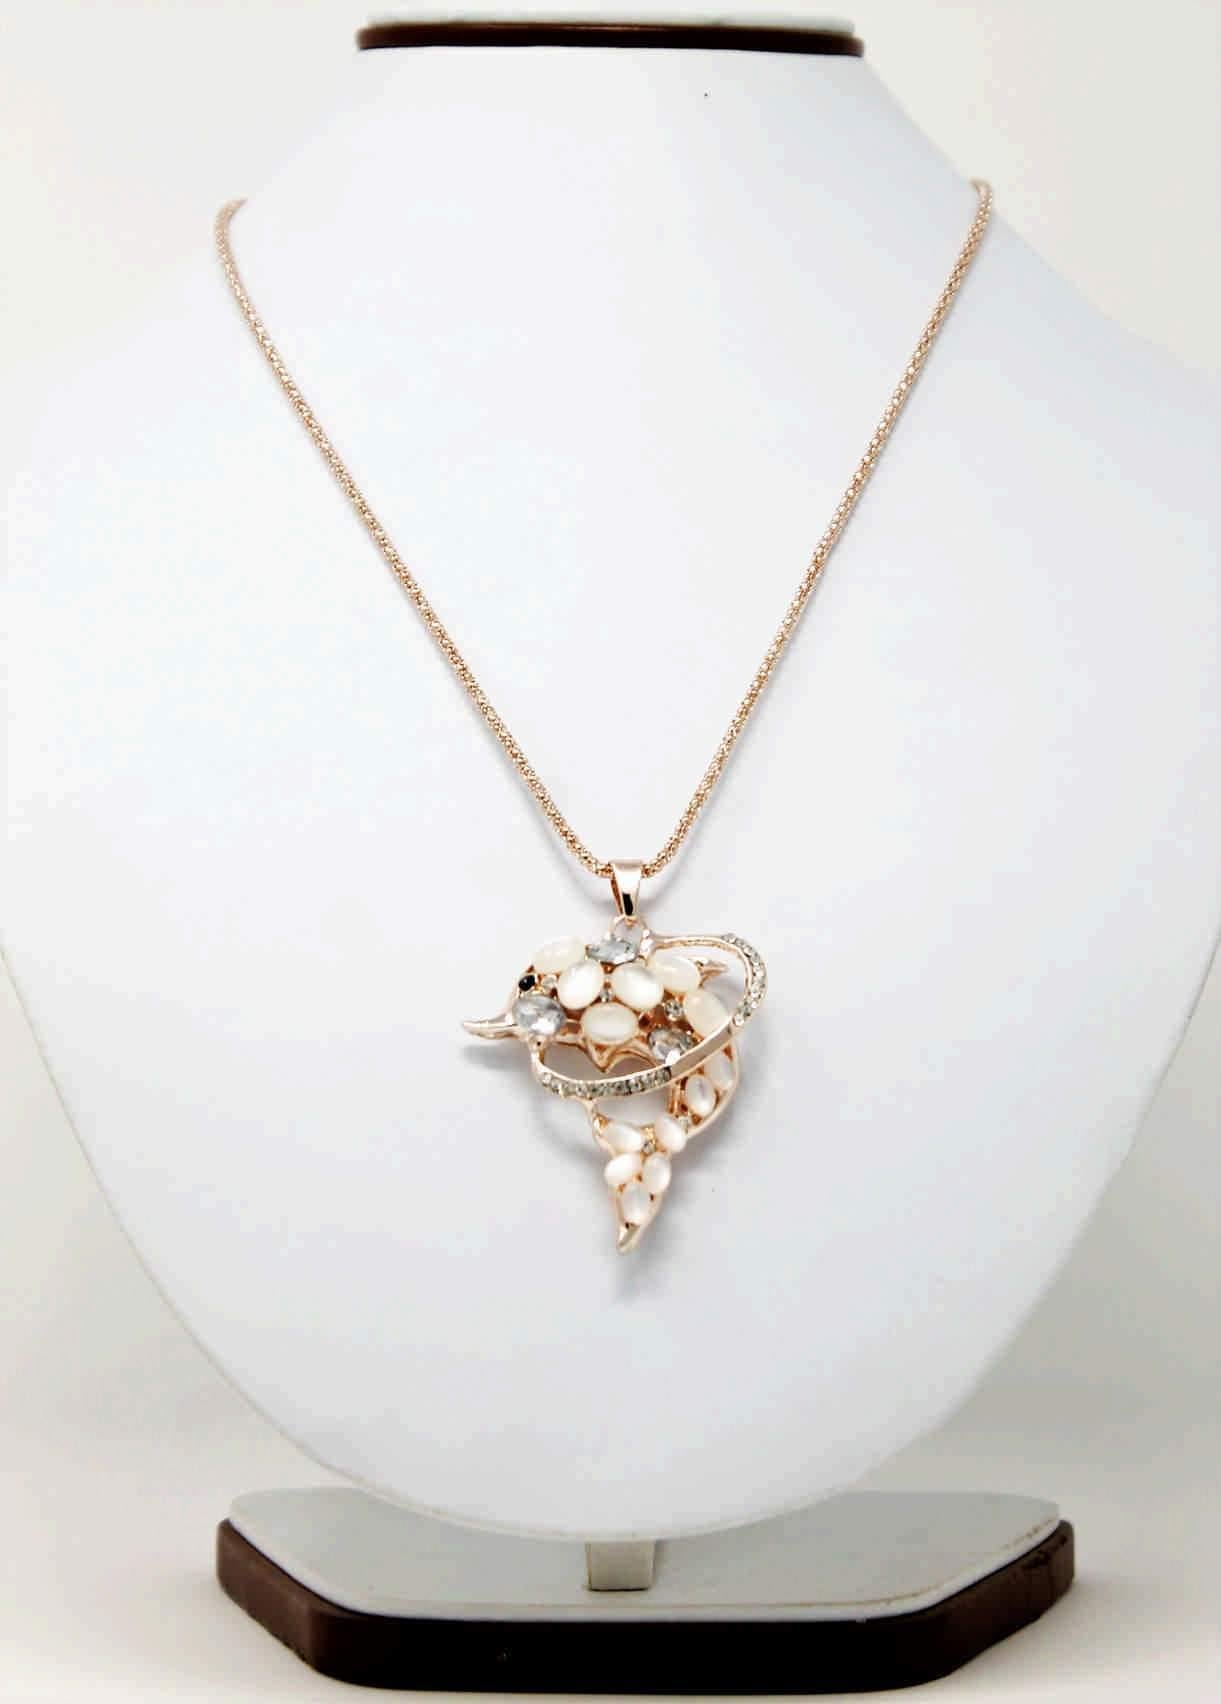 Indian Petals Rhinestones Studded Dolphin in Ring Design Imitation Fashion Pendant with Long Chain for Females